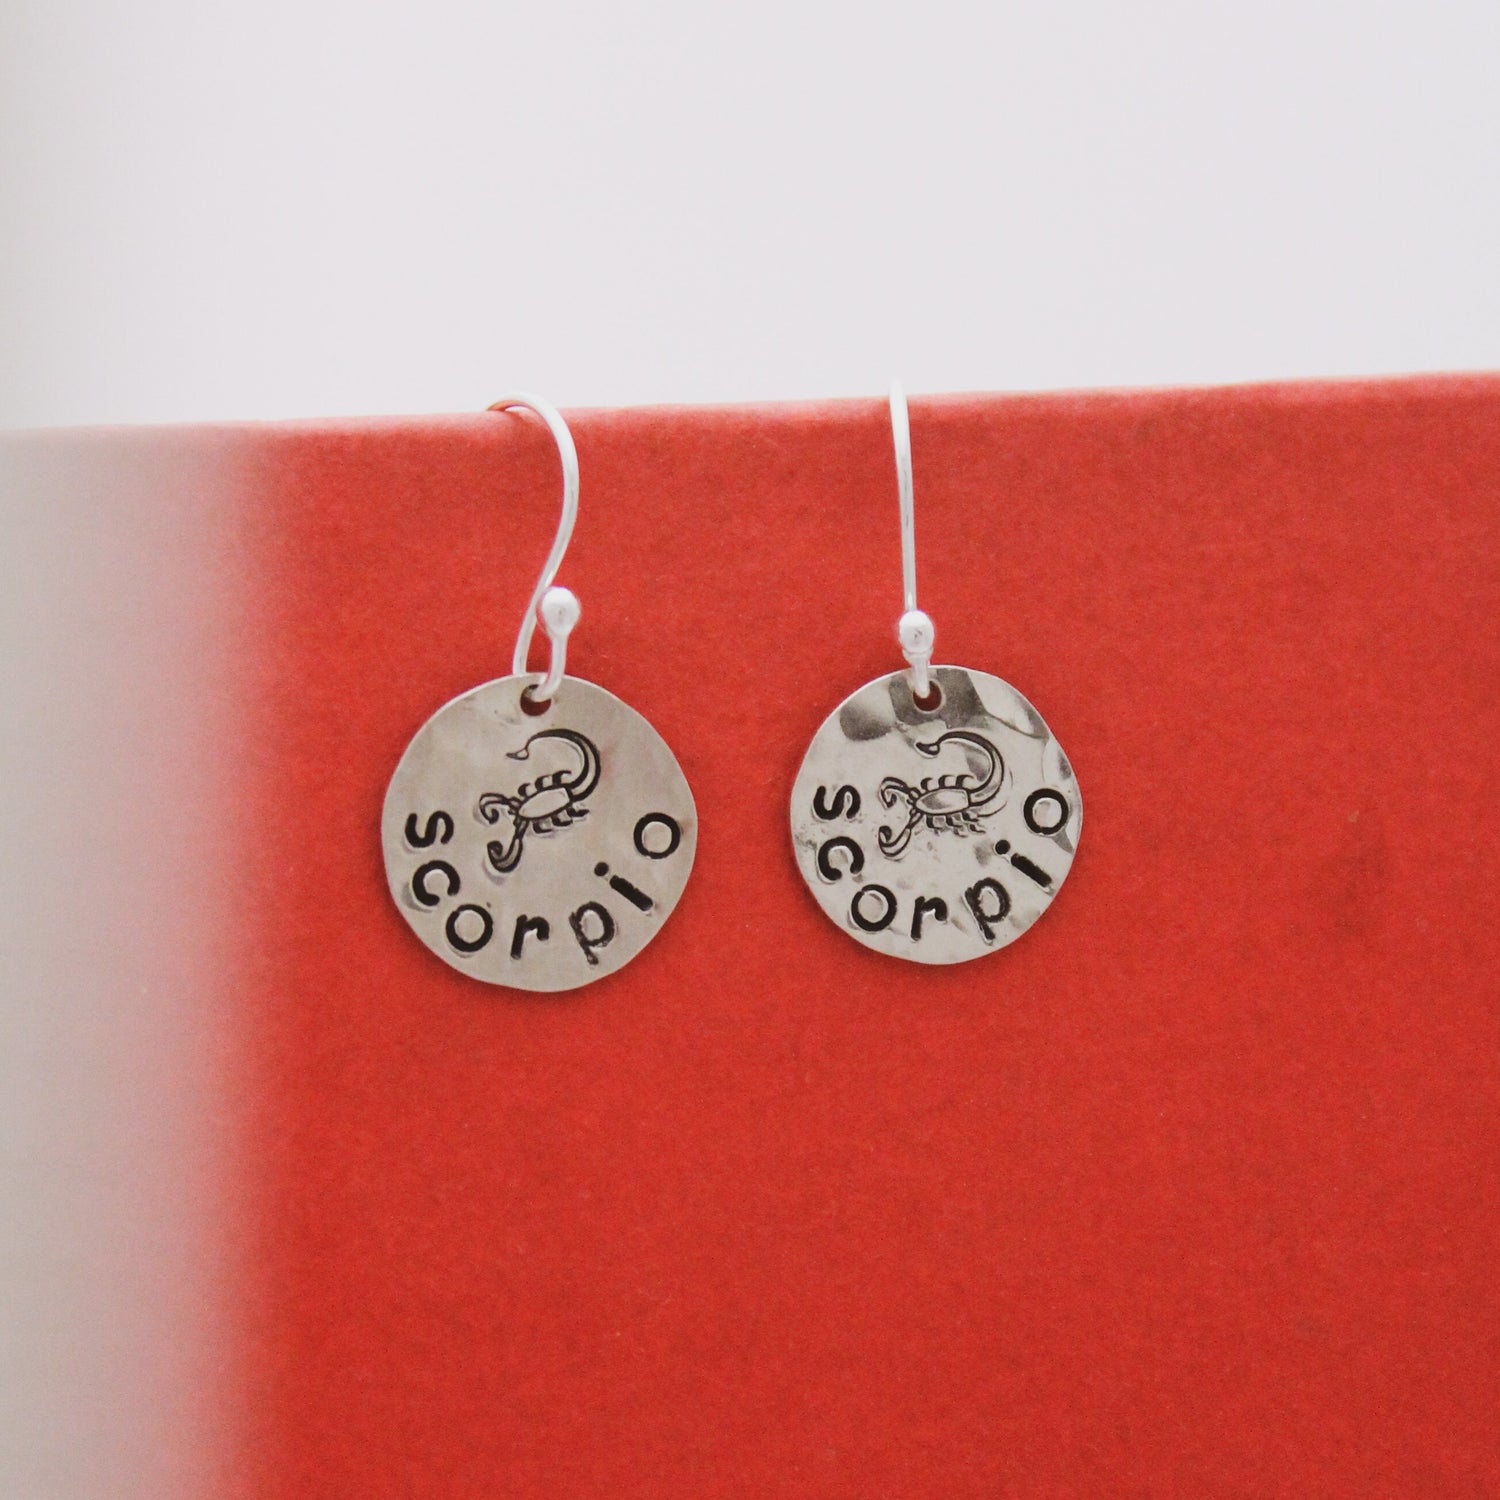 Scorpio Sterling Silver Earrings, Scorpio Zodiac Sign Jewelry, Hand Stamped Personalized Earrings, Scorpio Zodiac Jewelry Unique Gift Her